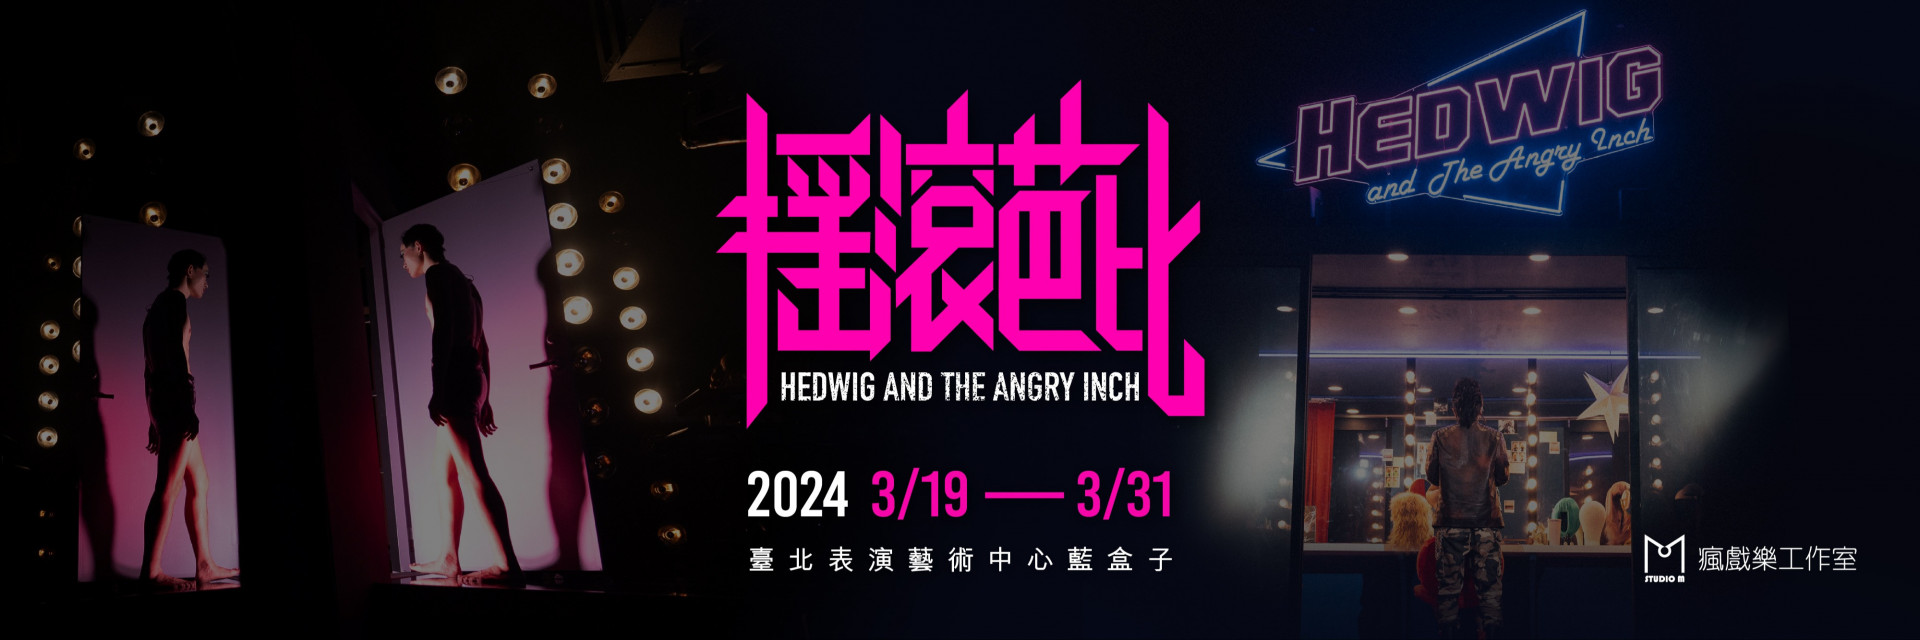 《Hedwig And the Angry Inch》 Mandarin Version 2024 主要圖片